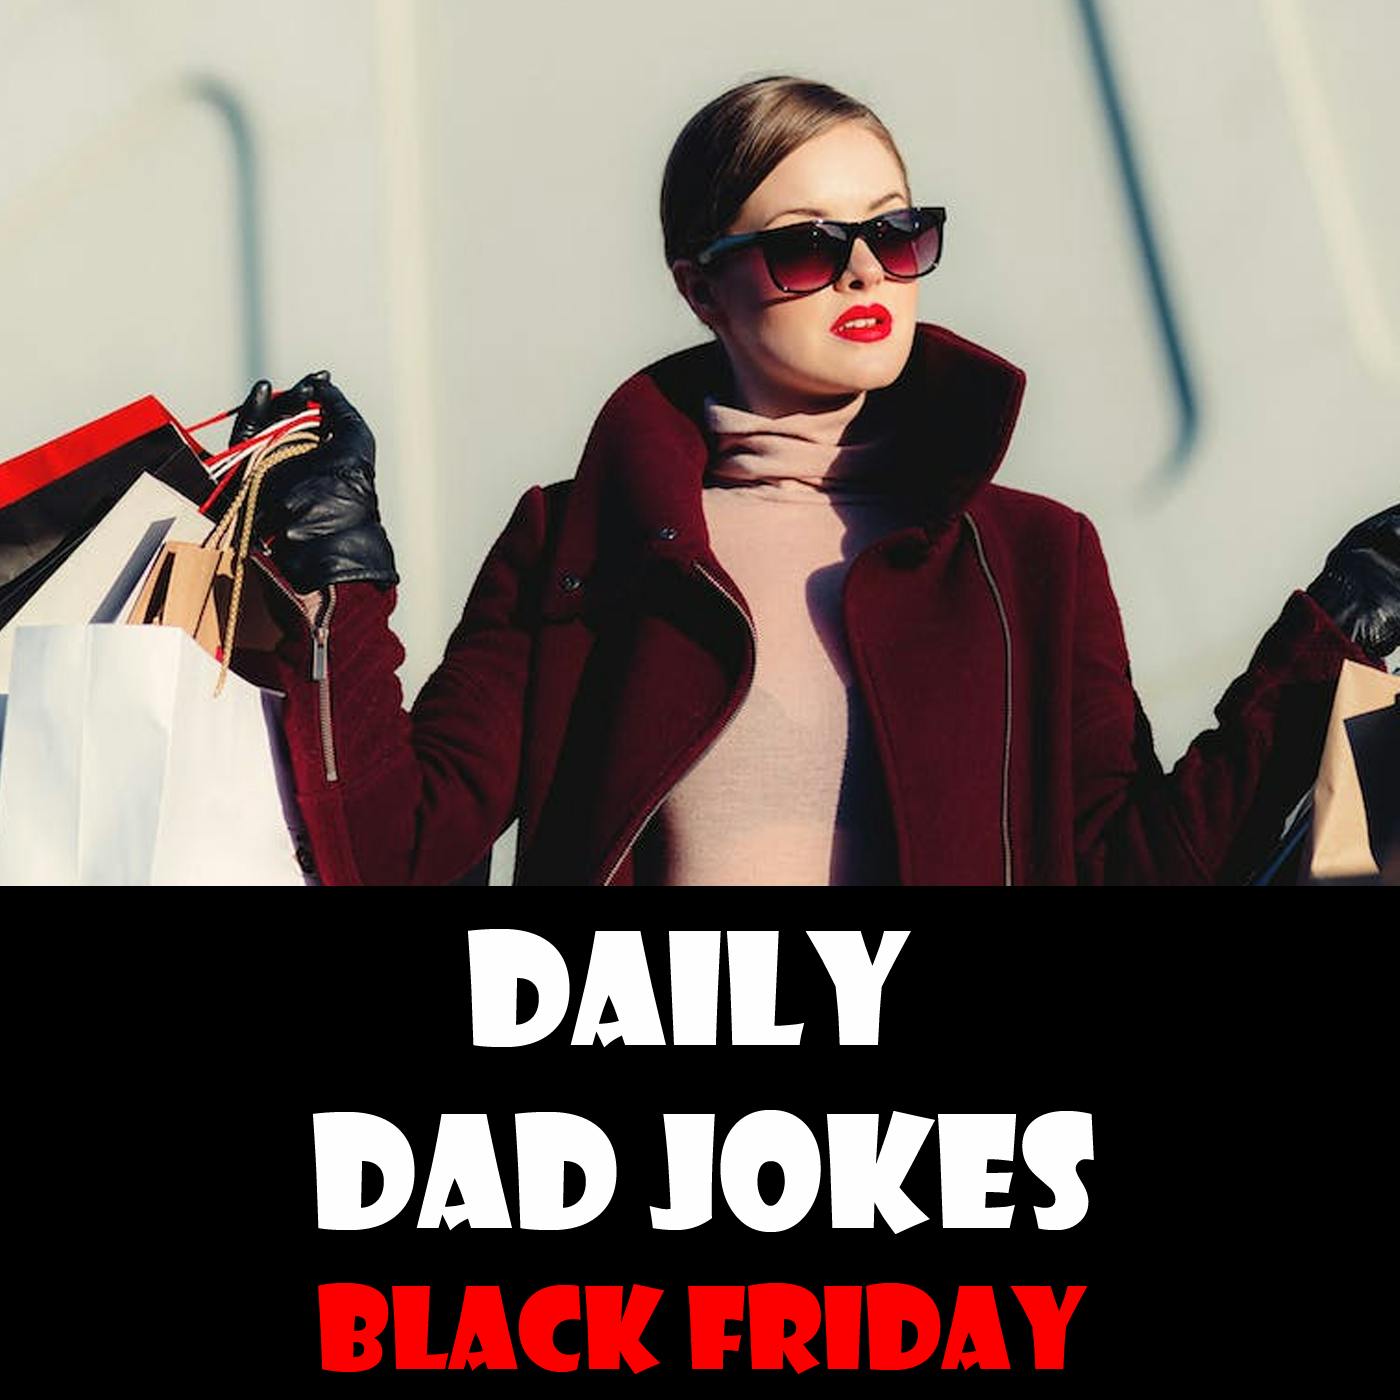 Black Friday Edition! Get these jokes at bargain basement prices! 25 November 2022